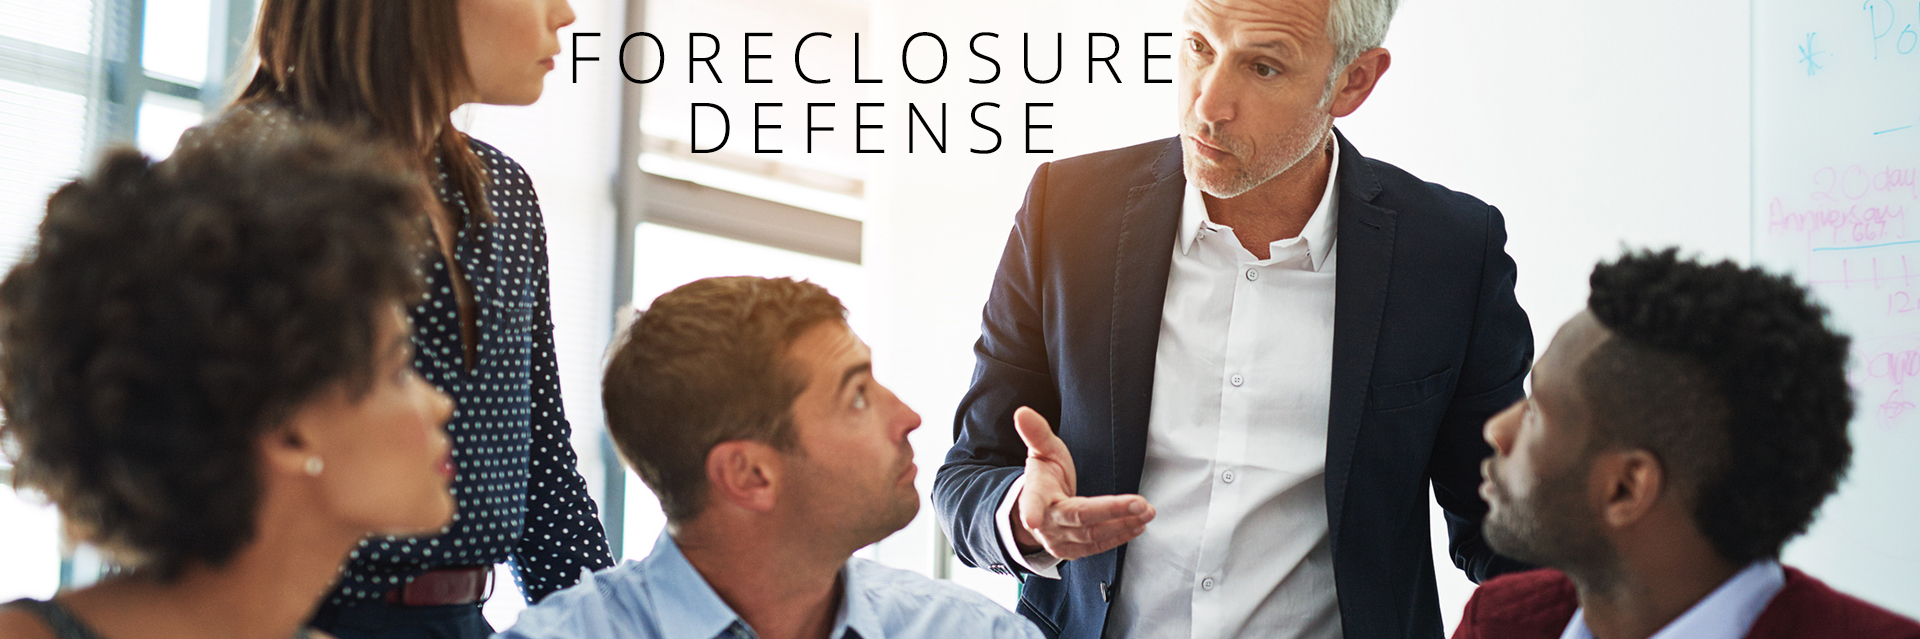 Your South Florida Foreclosure Defense Lawyer understands the Emotional aspects of Losing Your Home